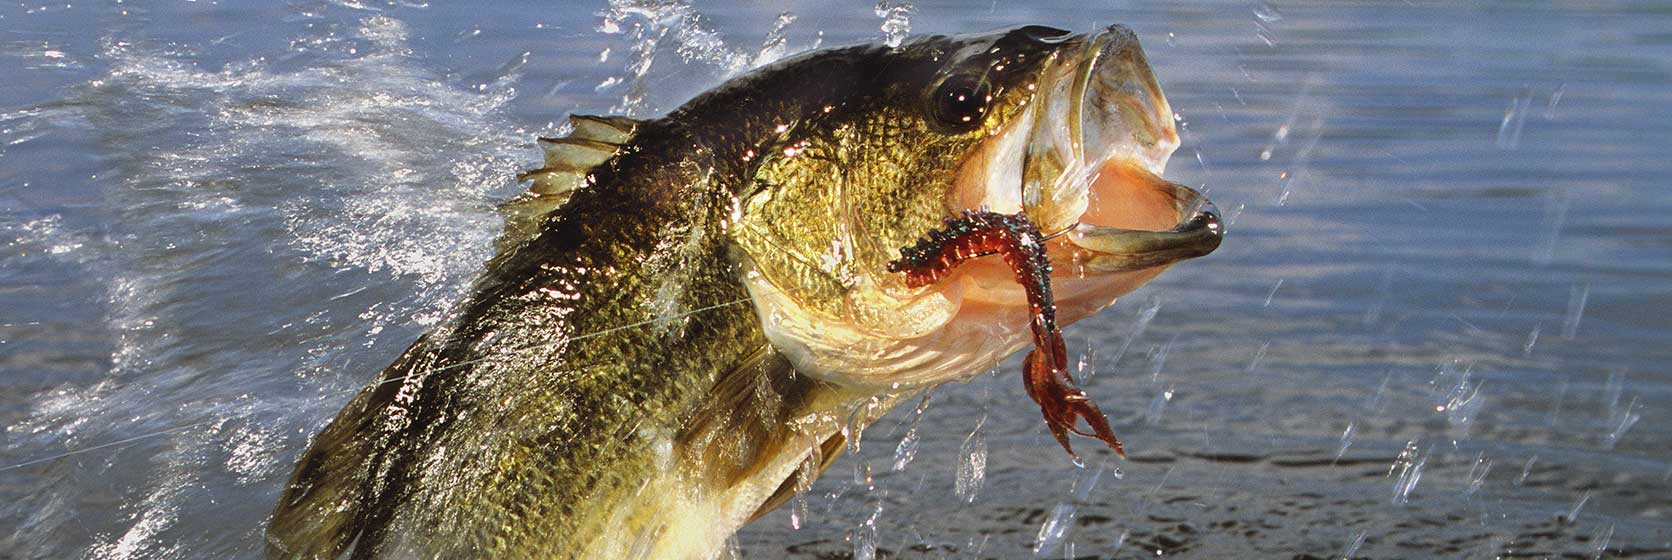 Hooking New Anglers on Winter Catfishing to Sell More Tackle in the Off  Season - Fishing Tackle Retailer - The Business Magazine of the  Sportfishing Industry